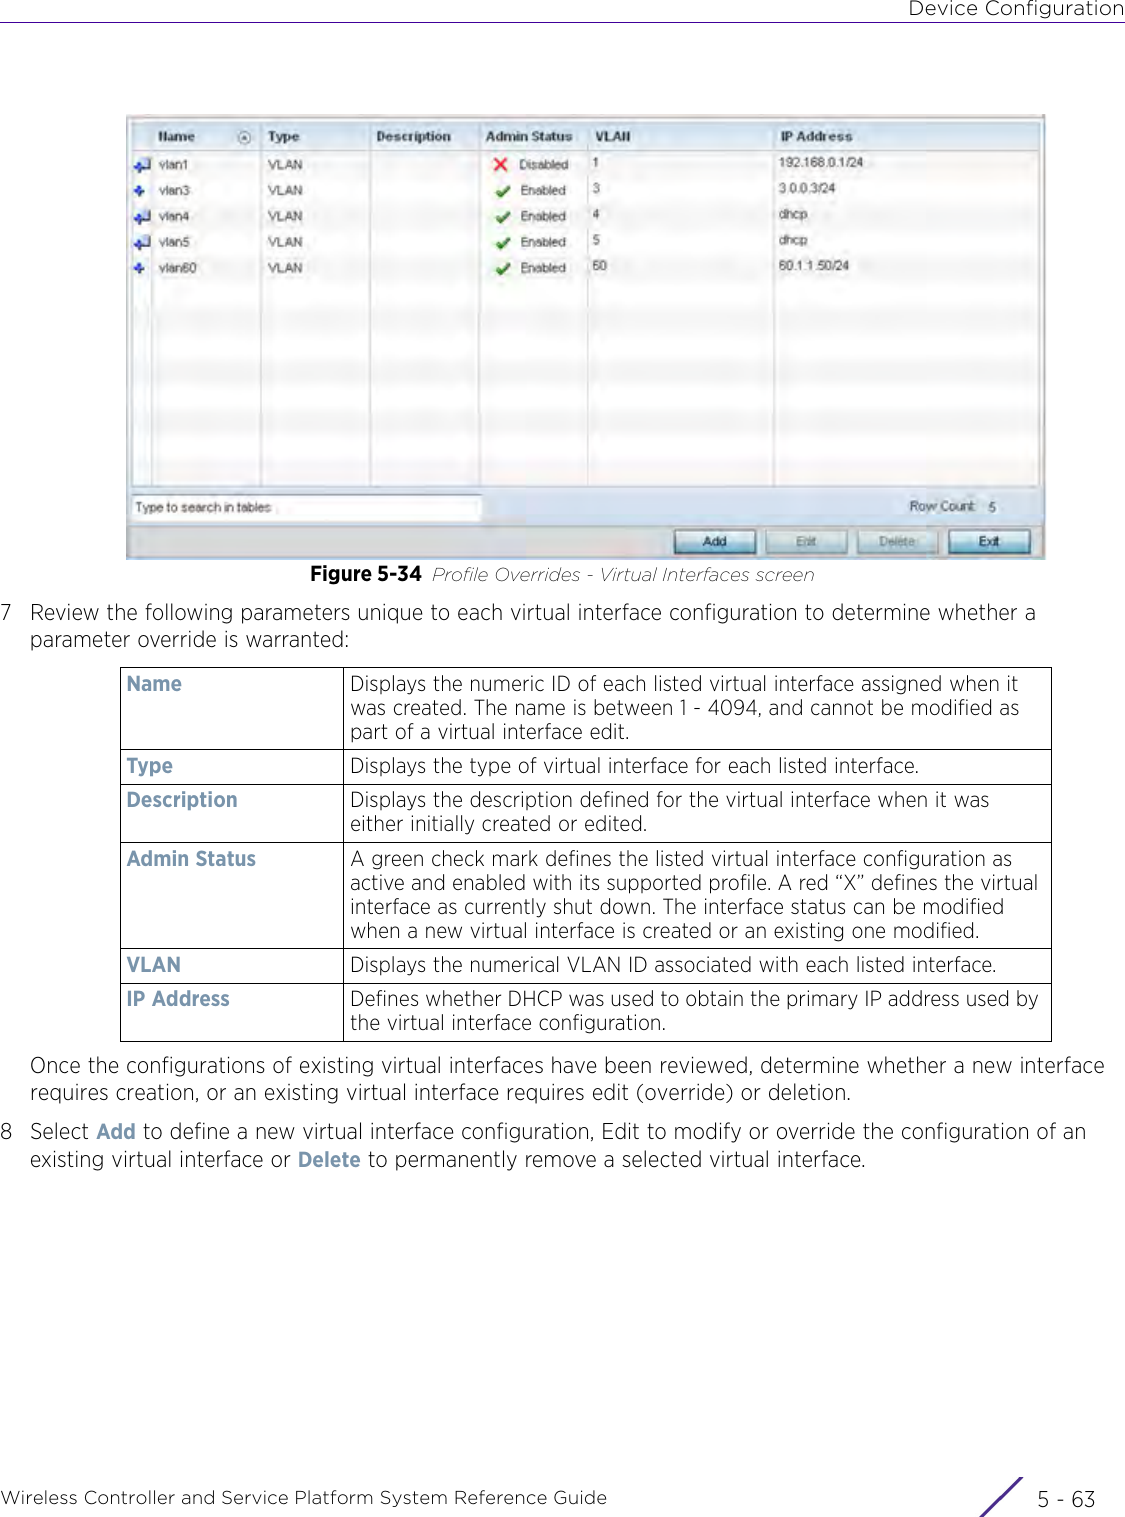 Device ConfigurationWireless Controller and Service Platform System Reference Guide 5 - 63Figure 5-34 Profile Overrides - Virtual Interfaces screen7 Review the following parameters unique to each virtual interface configuration to determine whether a parameter override is warranted:Once the configurations of existing virtual interfaces have been reviewed, determine whether a new interface requires creation, or an existing virtual interface requires edit (override) or deletion.8Select Add to define a new virtual interface configuration, Edit to modify or override the configuration of an existing virtual interface or Delete to permanently remove a selected virtual interface.Name Displays the numeric ID of each listed virtual interface assigned when it was created. The name is between 1 - 4094, and cannot be modified as part of a virtual interface edit.Type  Displays the type of virtual interface for each listed interface.Description Displays the description defined for the virtual interface when it was either initially created or edited.Admin Status A green check mark defines the listed virtual interface configuration as active and enabled with its supported profile. A red “X” defines the virtual interface as currently shut down. The interface status can be modified when a new virtual interface is created or an existing one modified. VLAN Displays the numerical VLAN ID associated with each listed interface.IP Address Defines whether DHCP was used to obtain the primary IP address used by the virtual interface configuration.